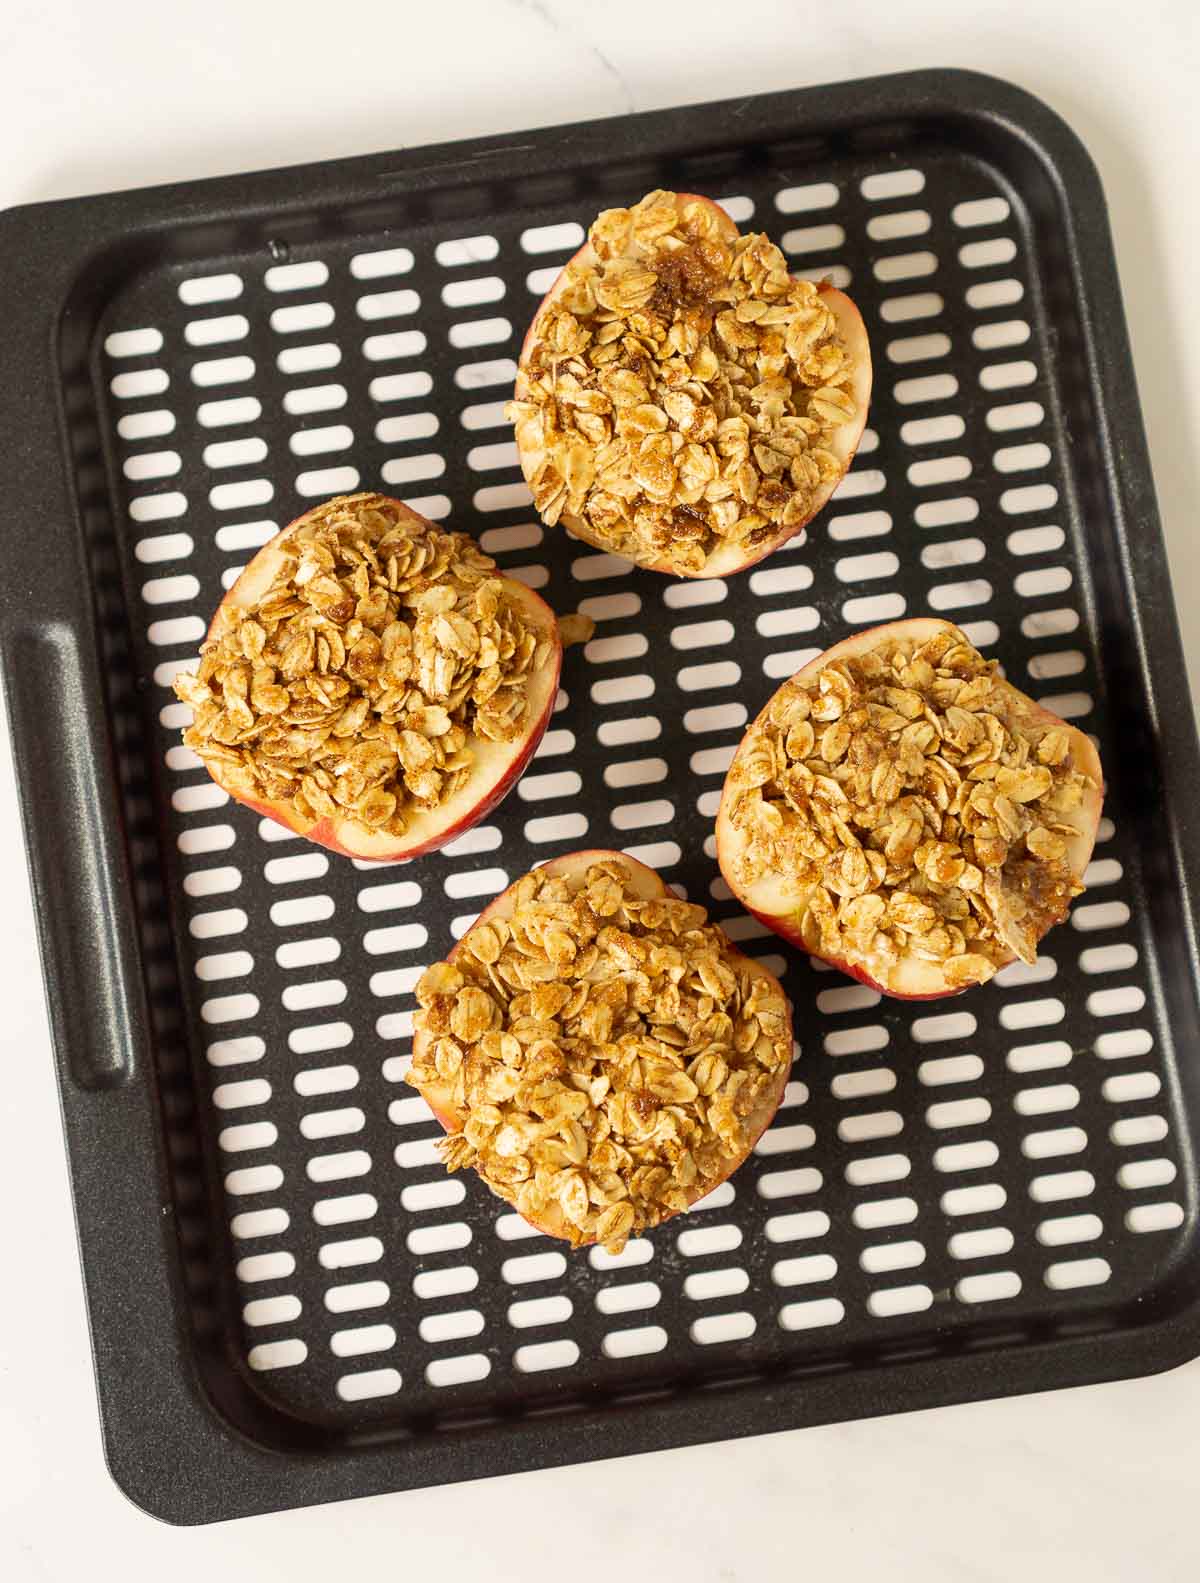 Apple halves stuffed with cinnamon oat topping on an air fryer tray